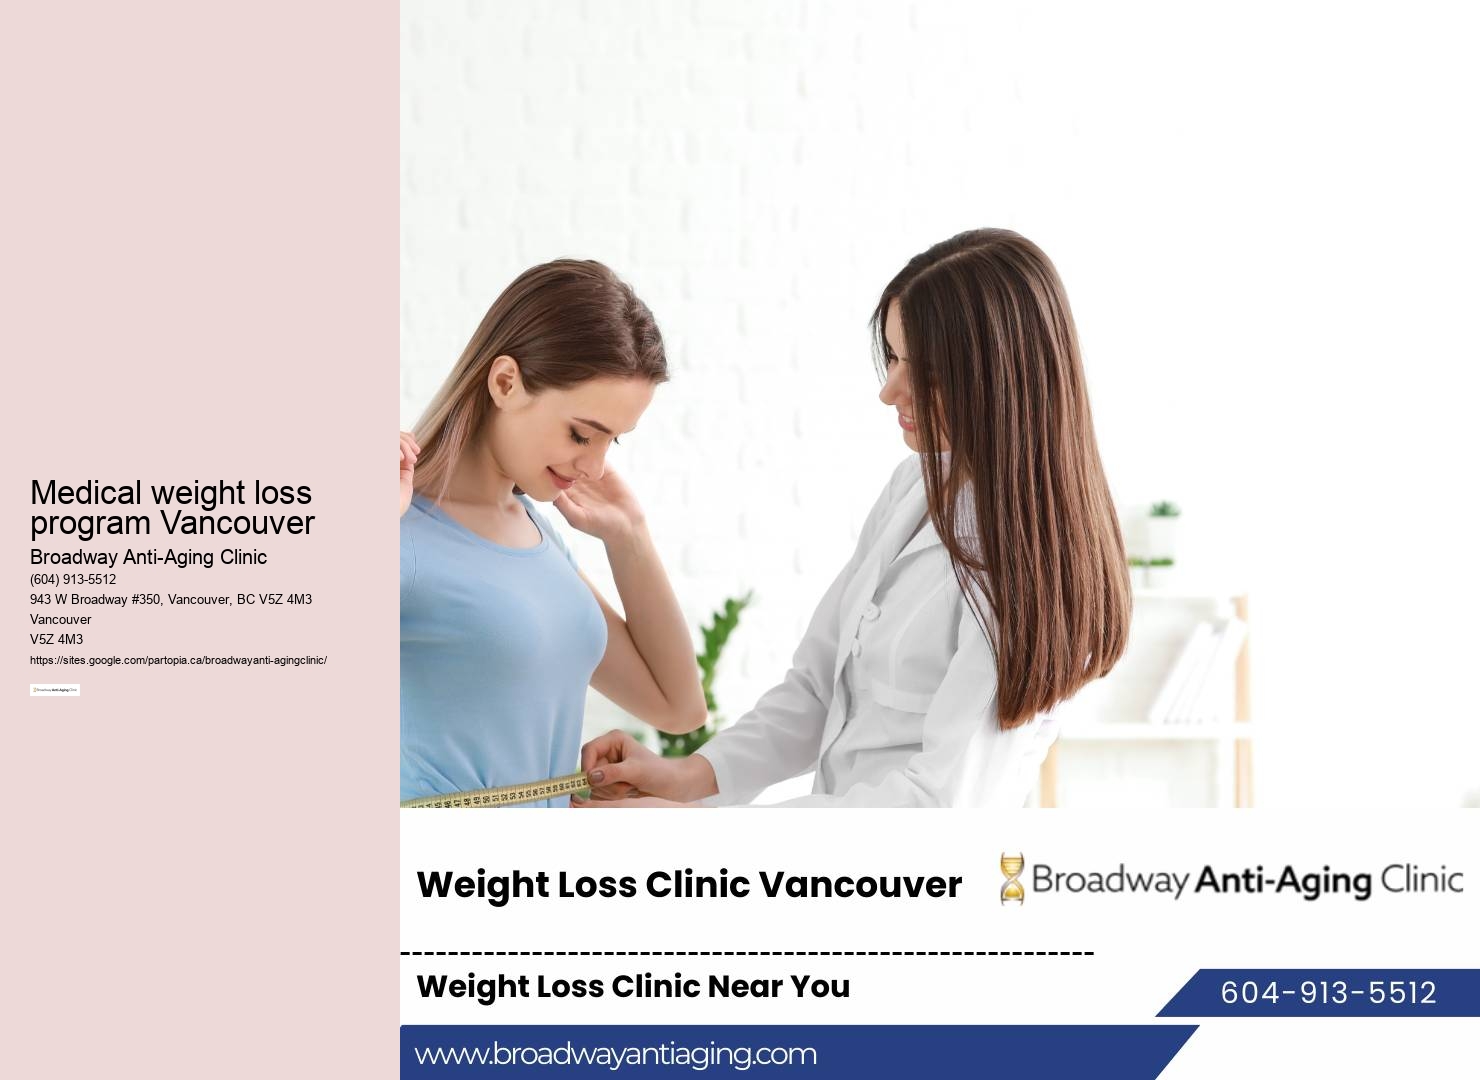 Medical weight loss program Vancouver